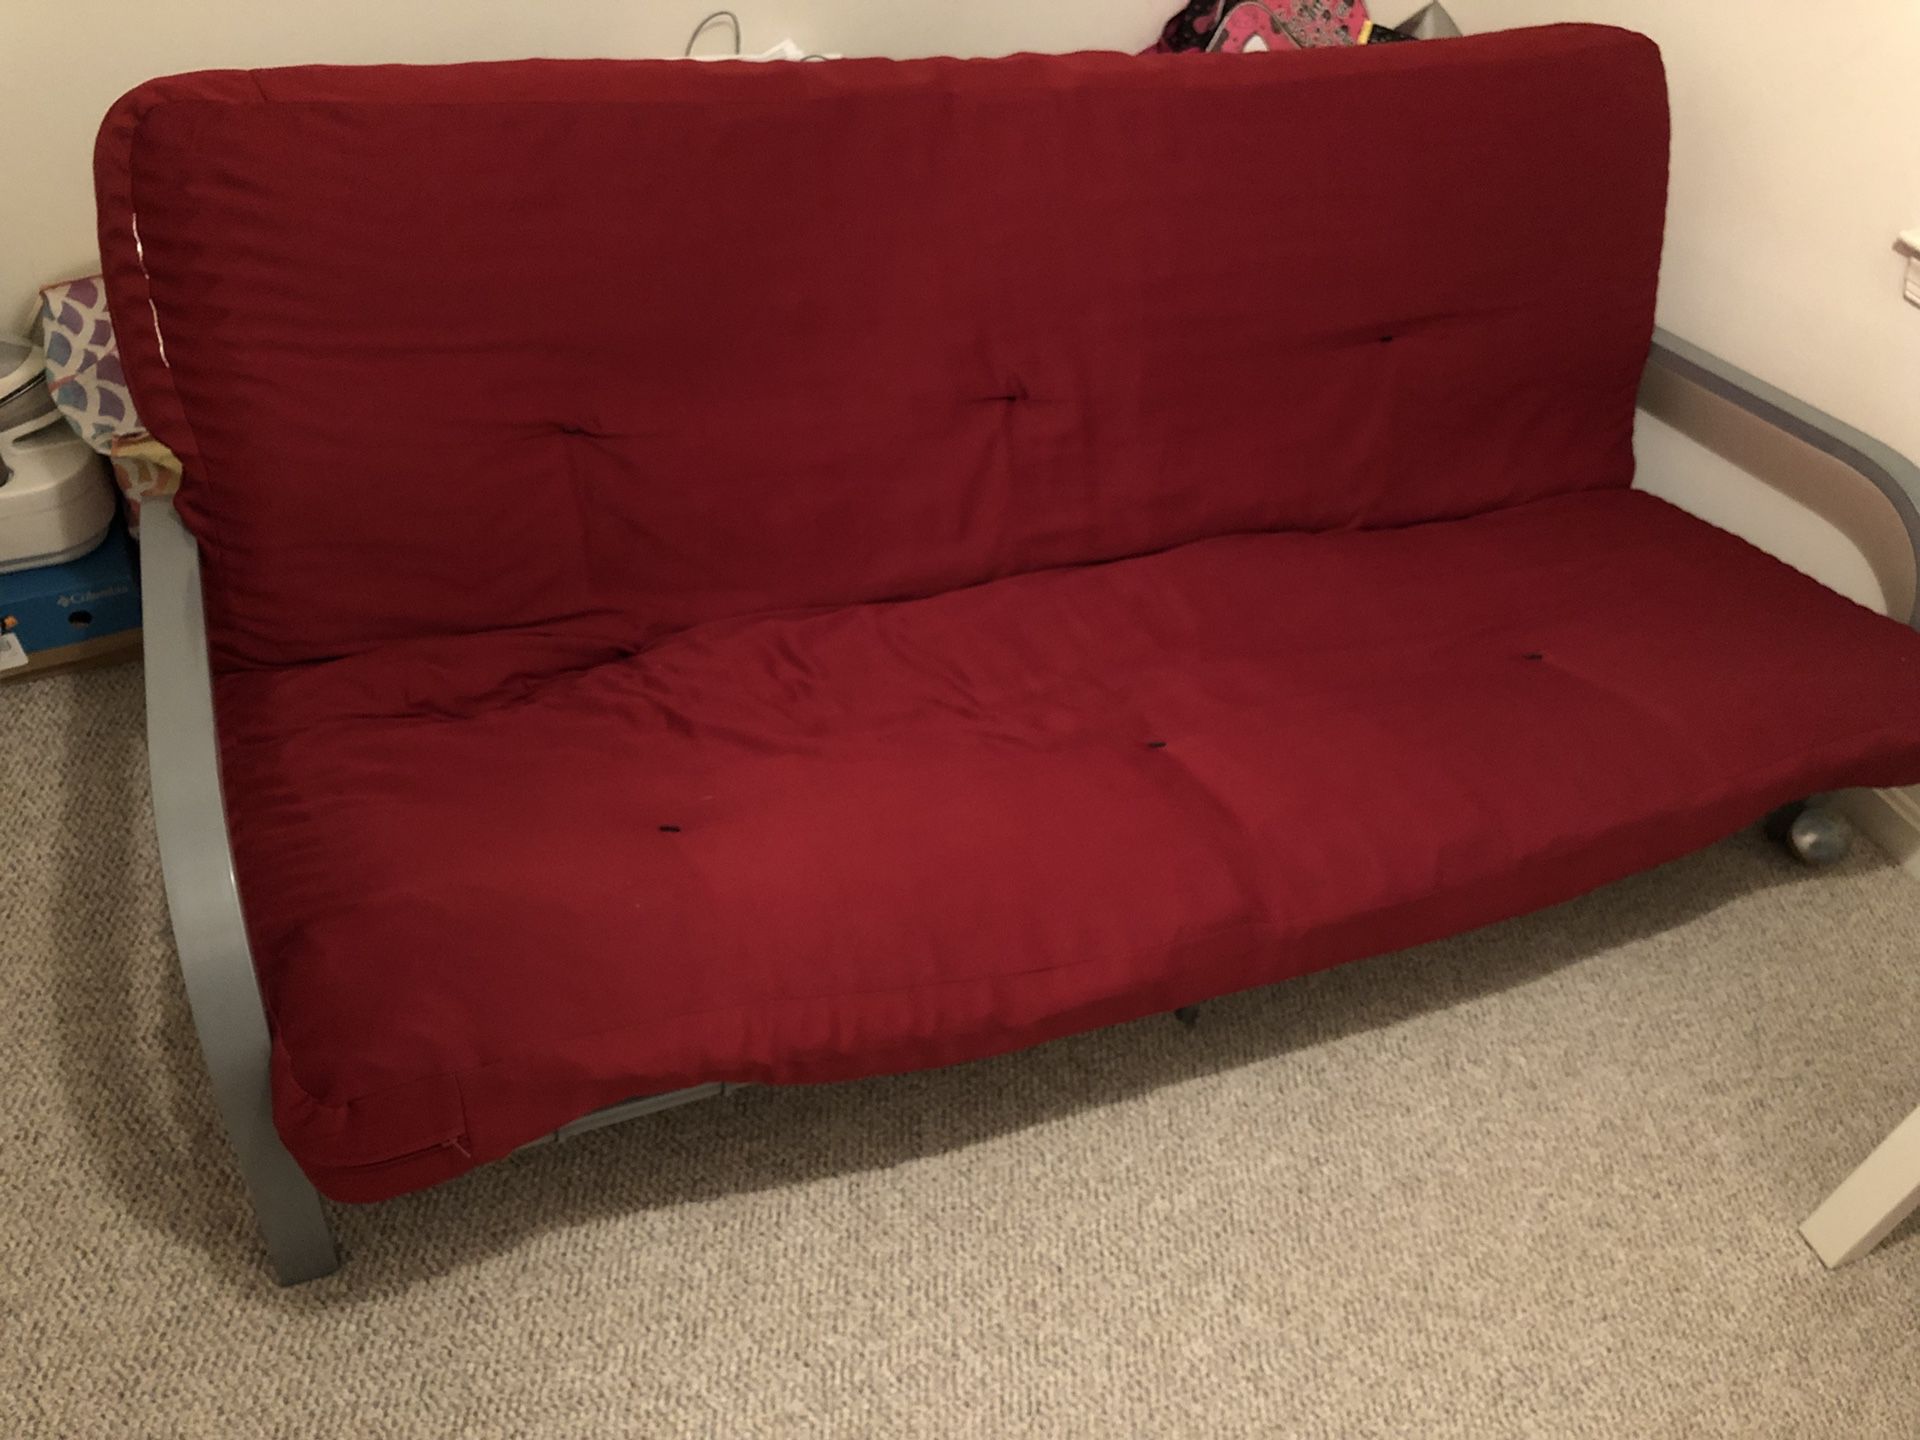 Moving Sale-Mainstays Metal Arm Futon with 6" Mattress - Ruby Red - Home Furniture - Bedroom - Sofa-sleeper -